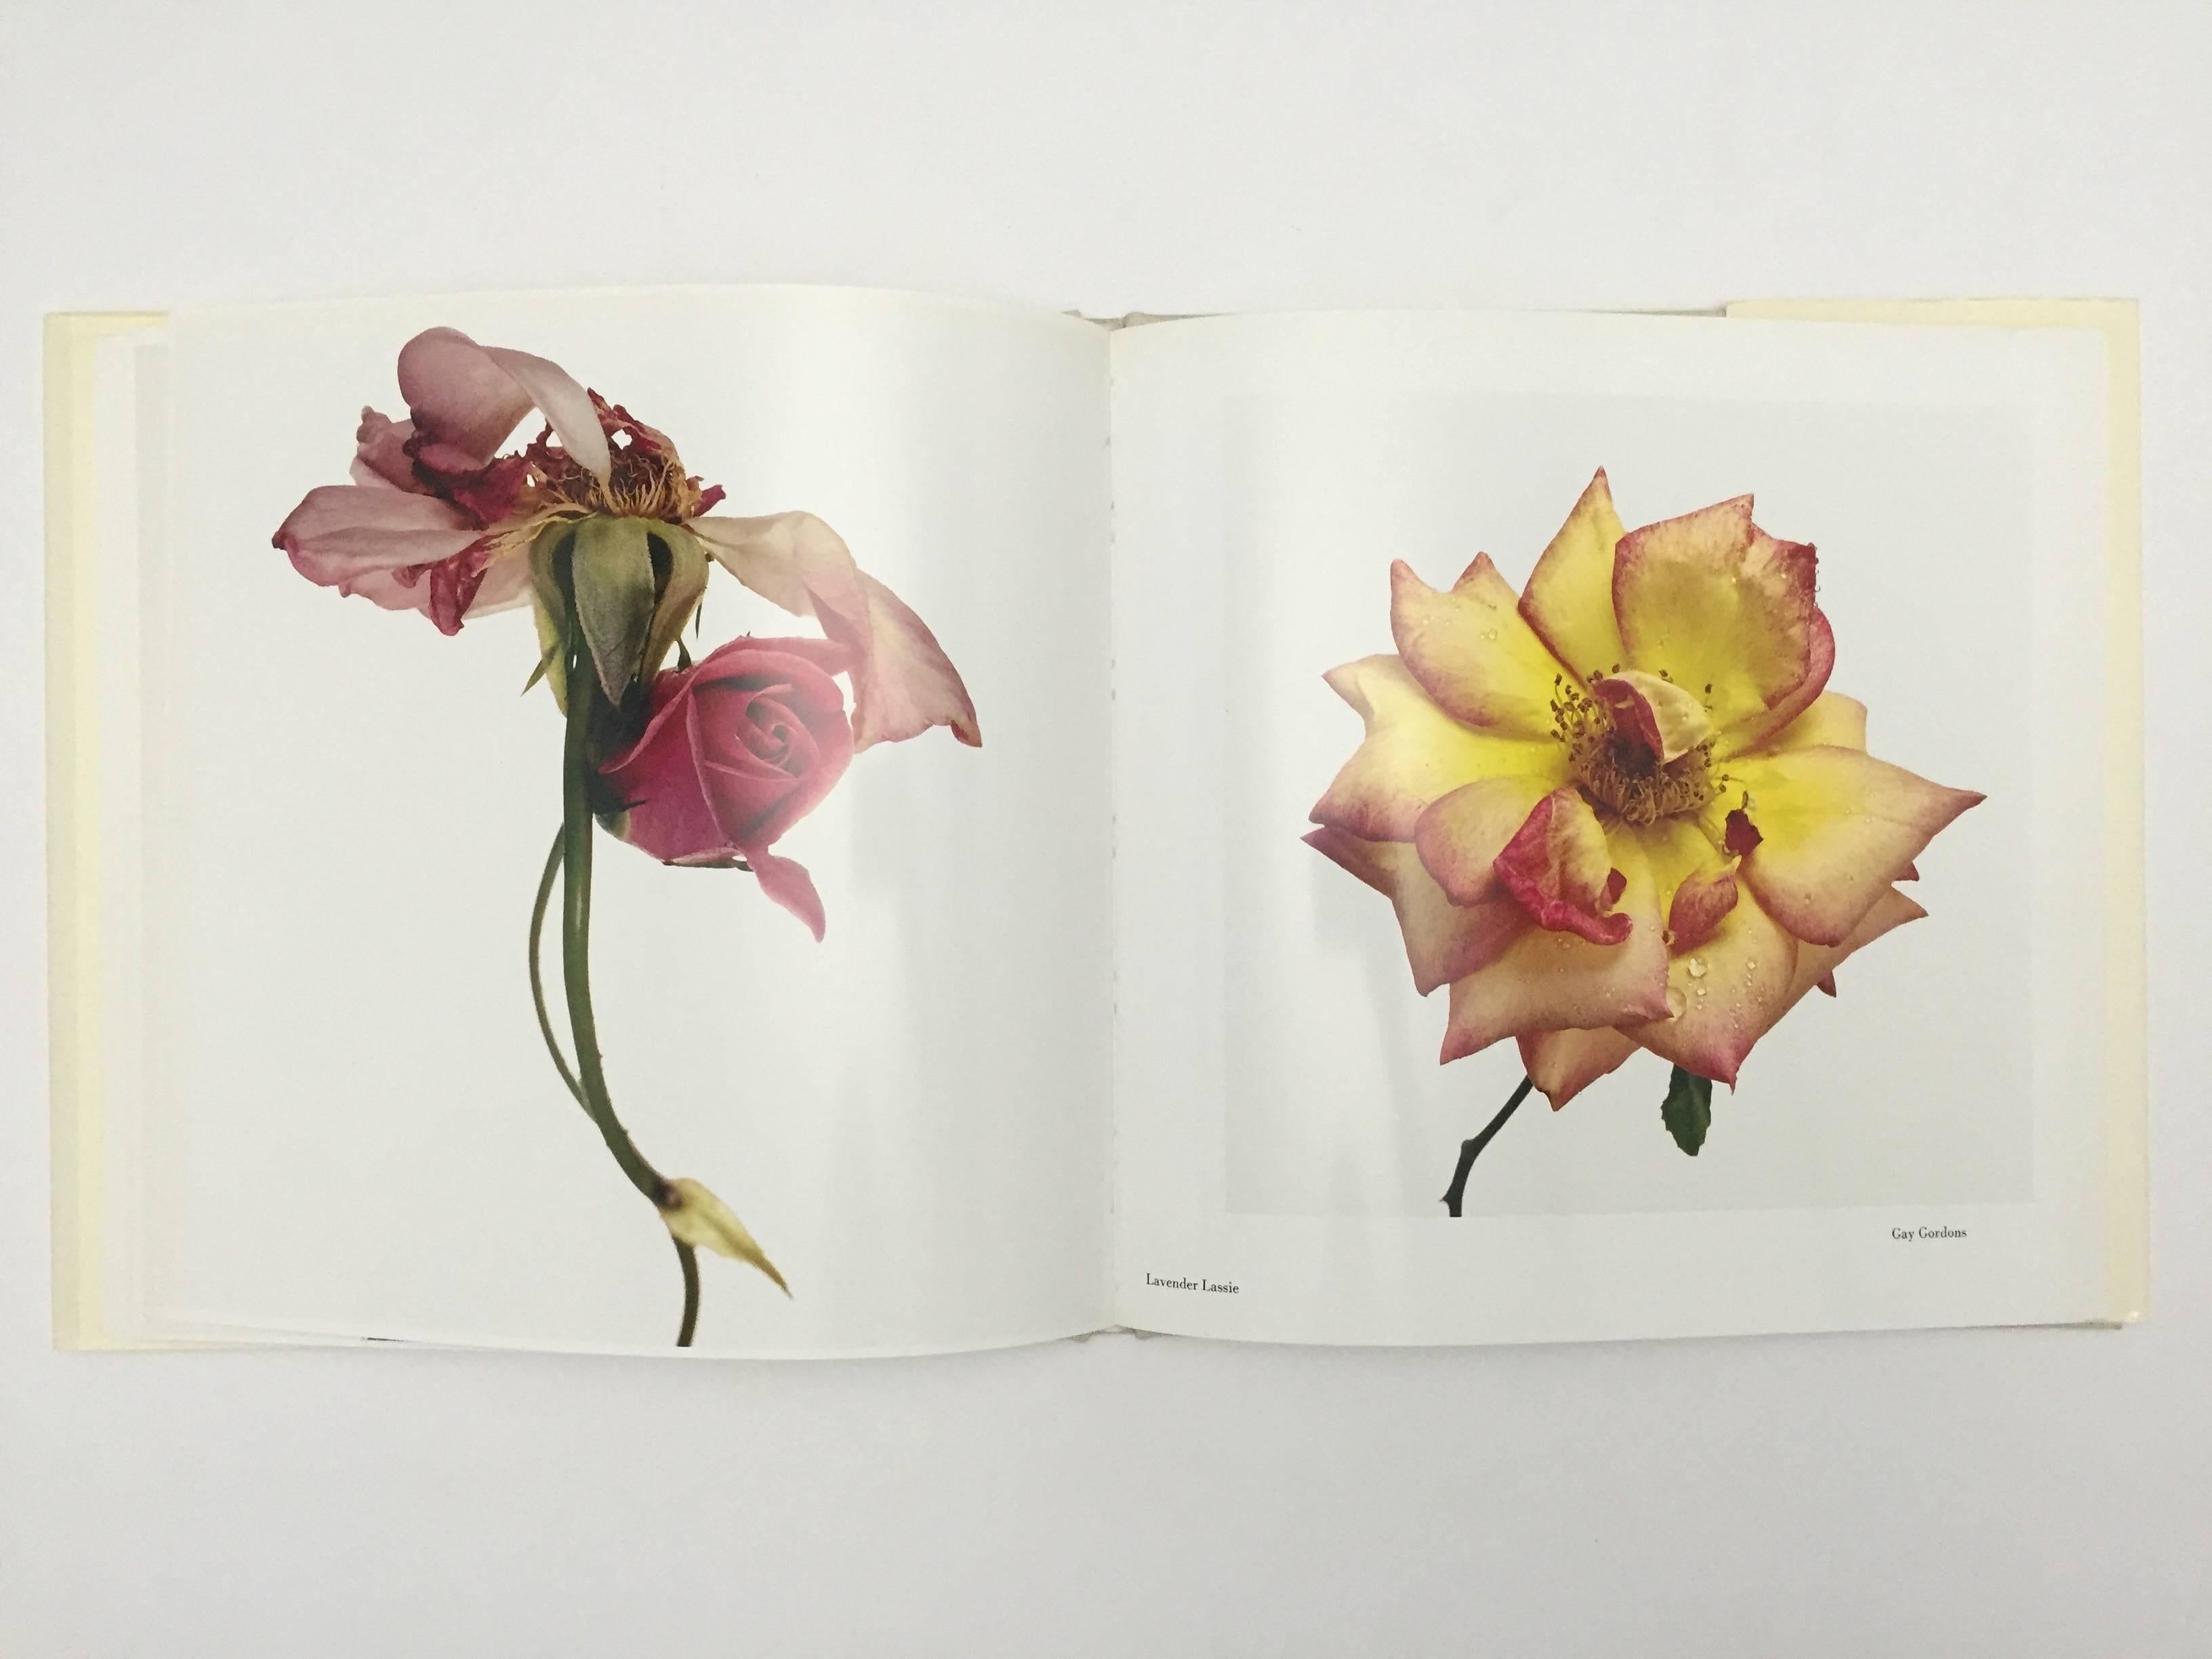 First edition, Harmony books, 1980.

Known best for his fashion photography, Irving Penn created his own photographic assignments for flower studies throughout the 1960s and 1970s and the series was presented together for the time in this edition.